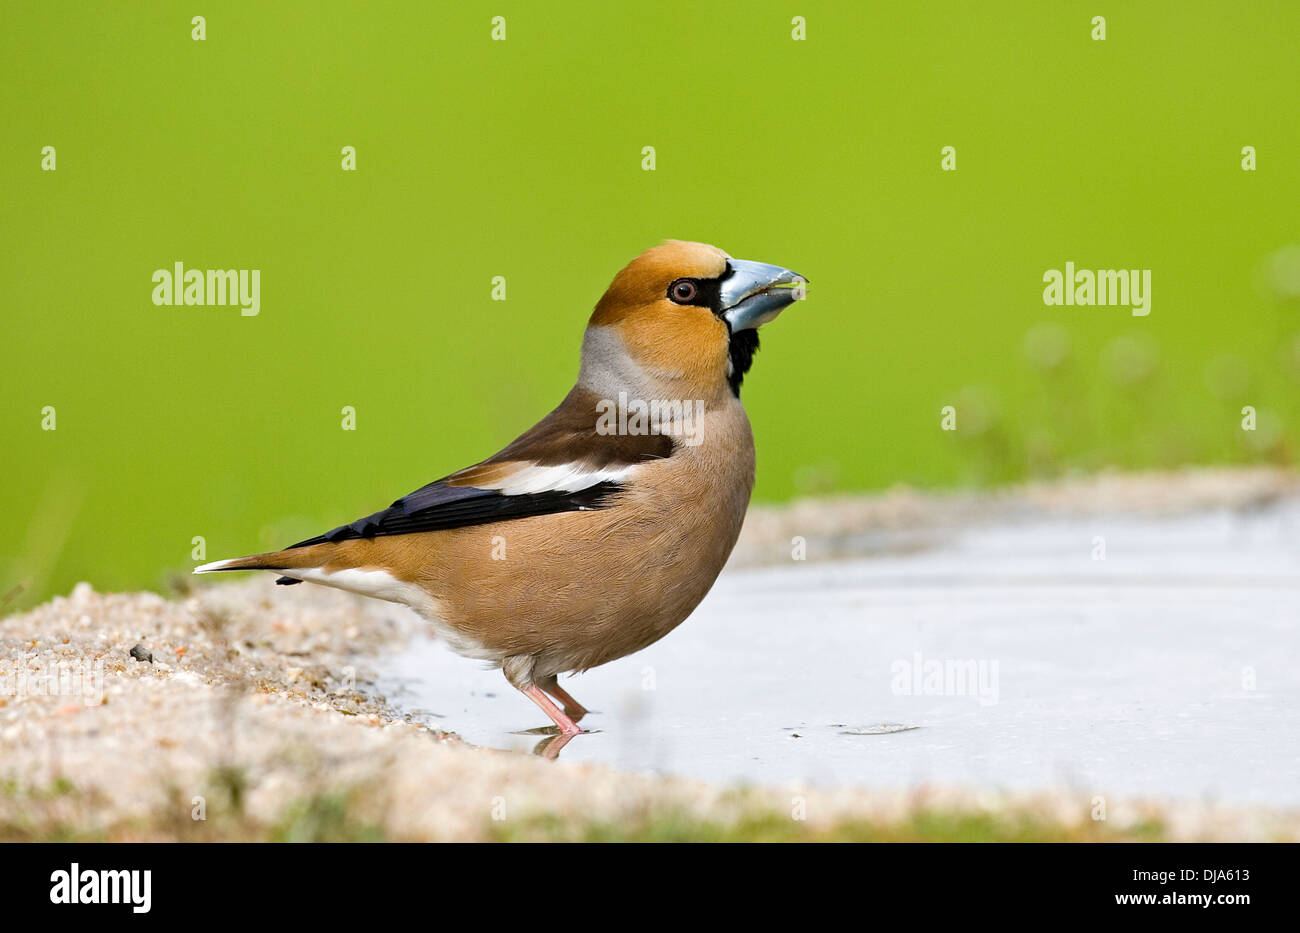 Hawfinch Coccothraustes coccothraustes Stock Photo